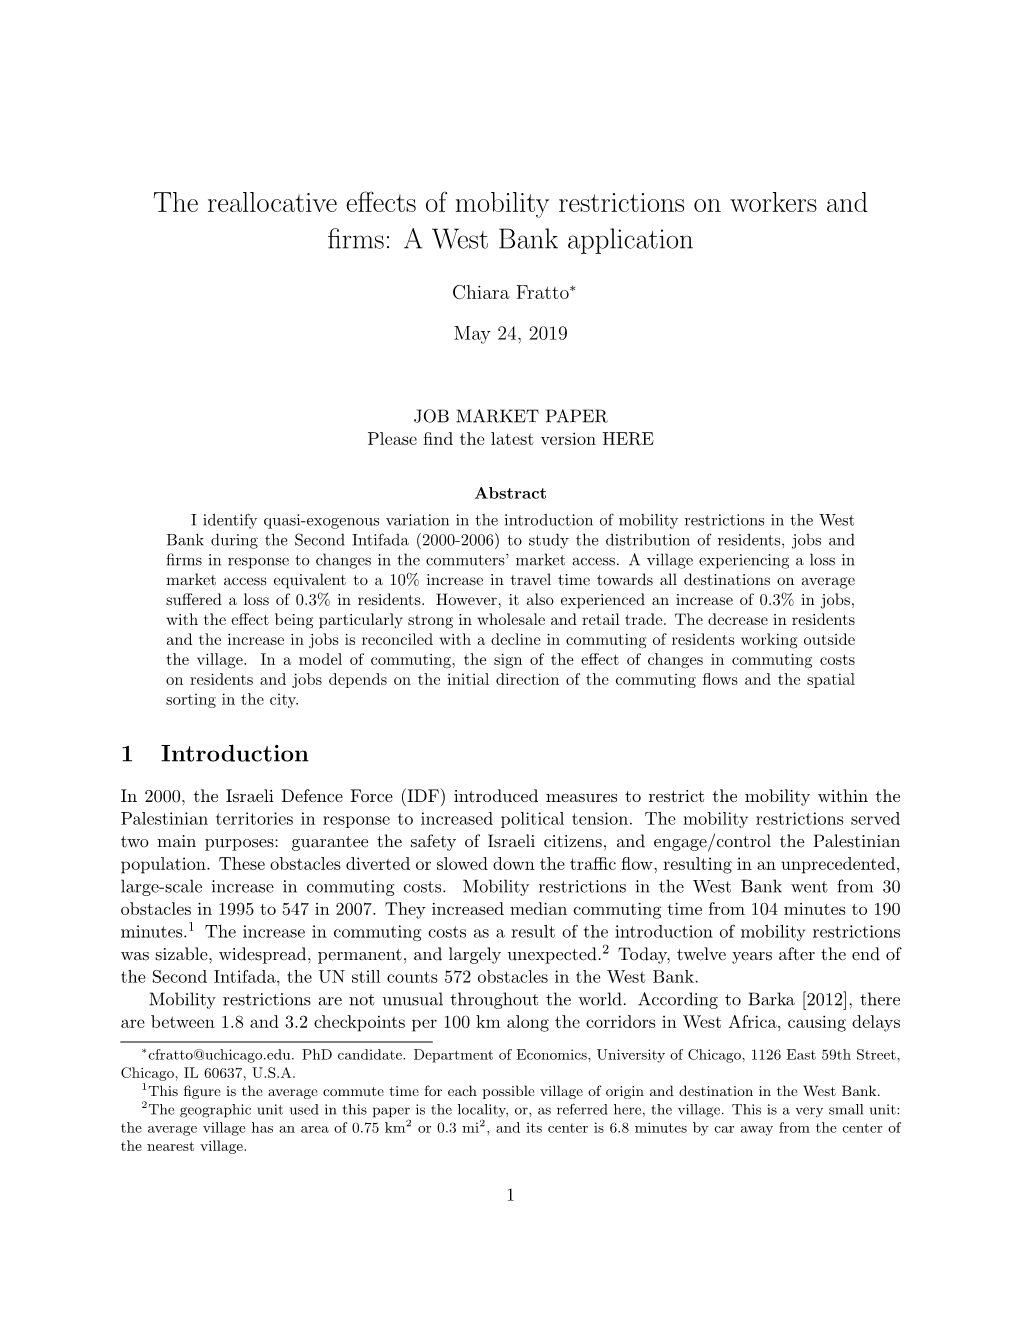 The Reallocative Effects of Mobility Restrictions on Workers and Firms: A